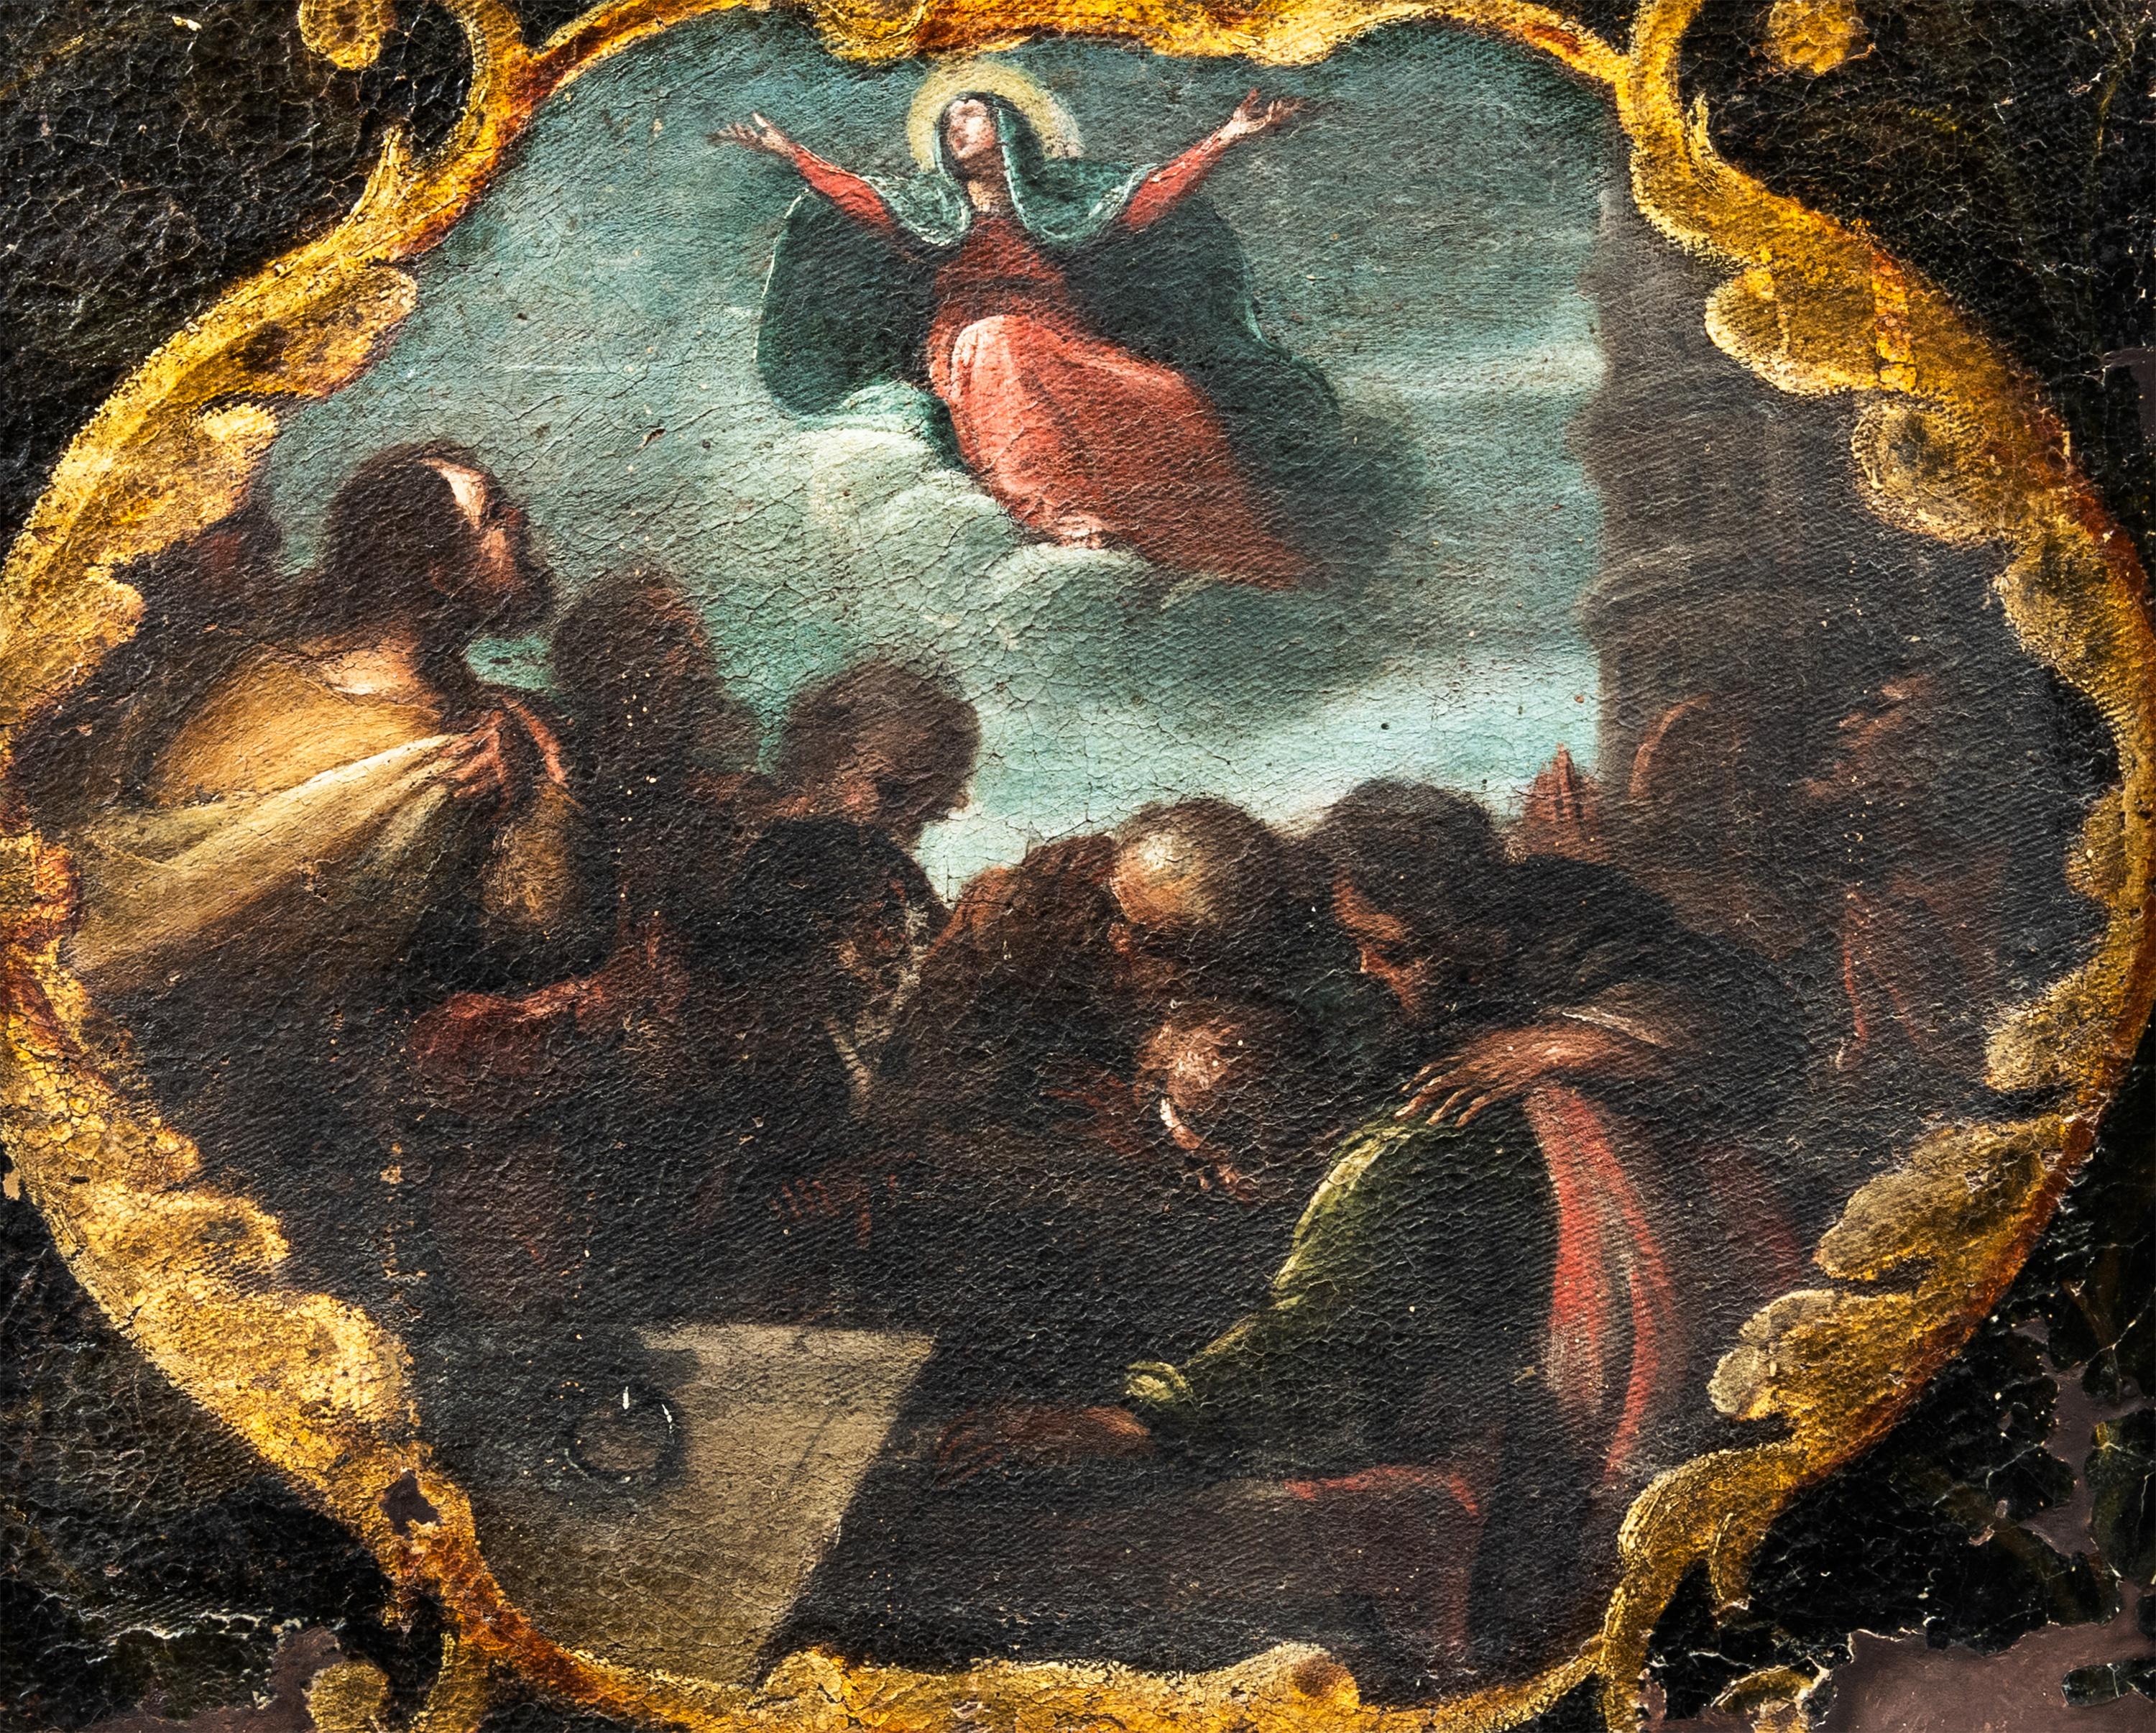 Baroque painter - 18th century figure painting - Assumption of the Virgin Italy - Painting by Unknown